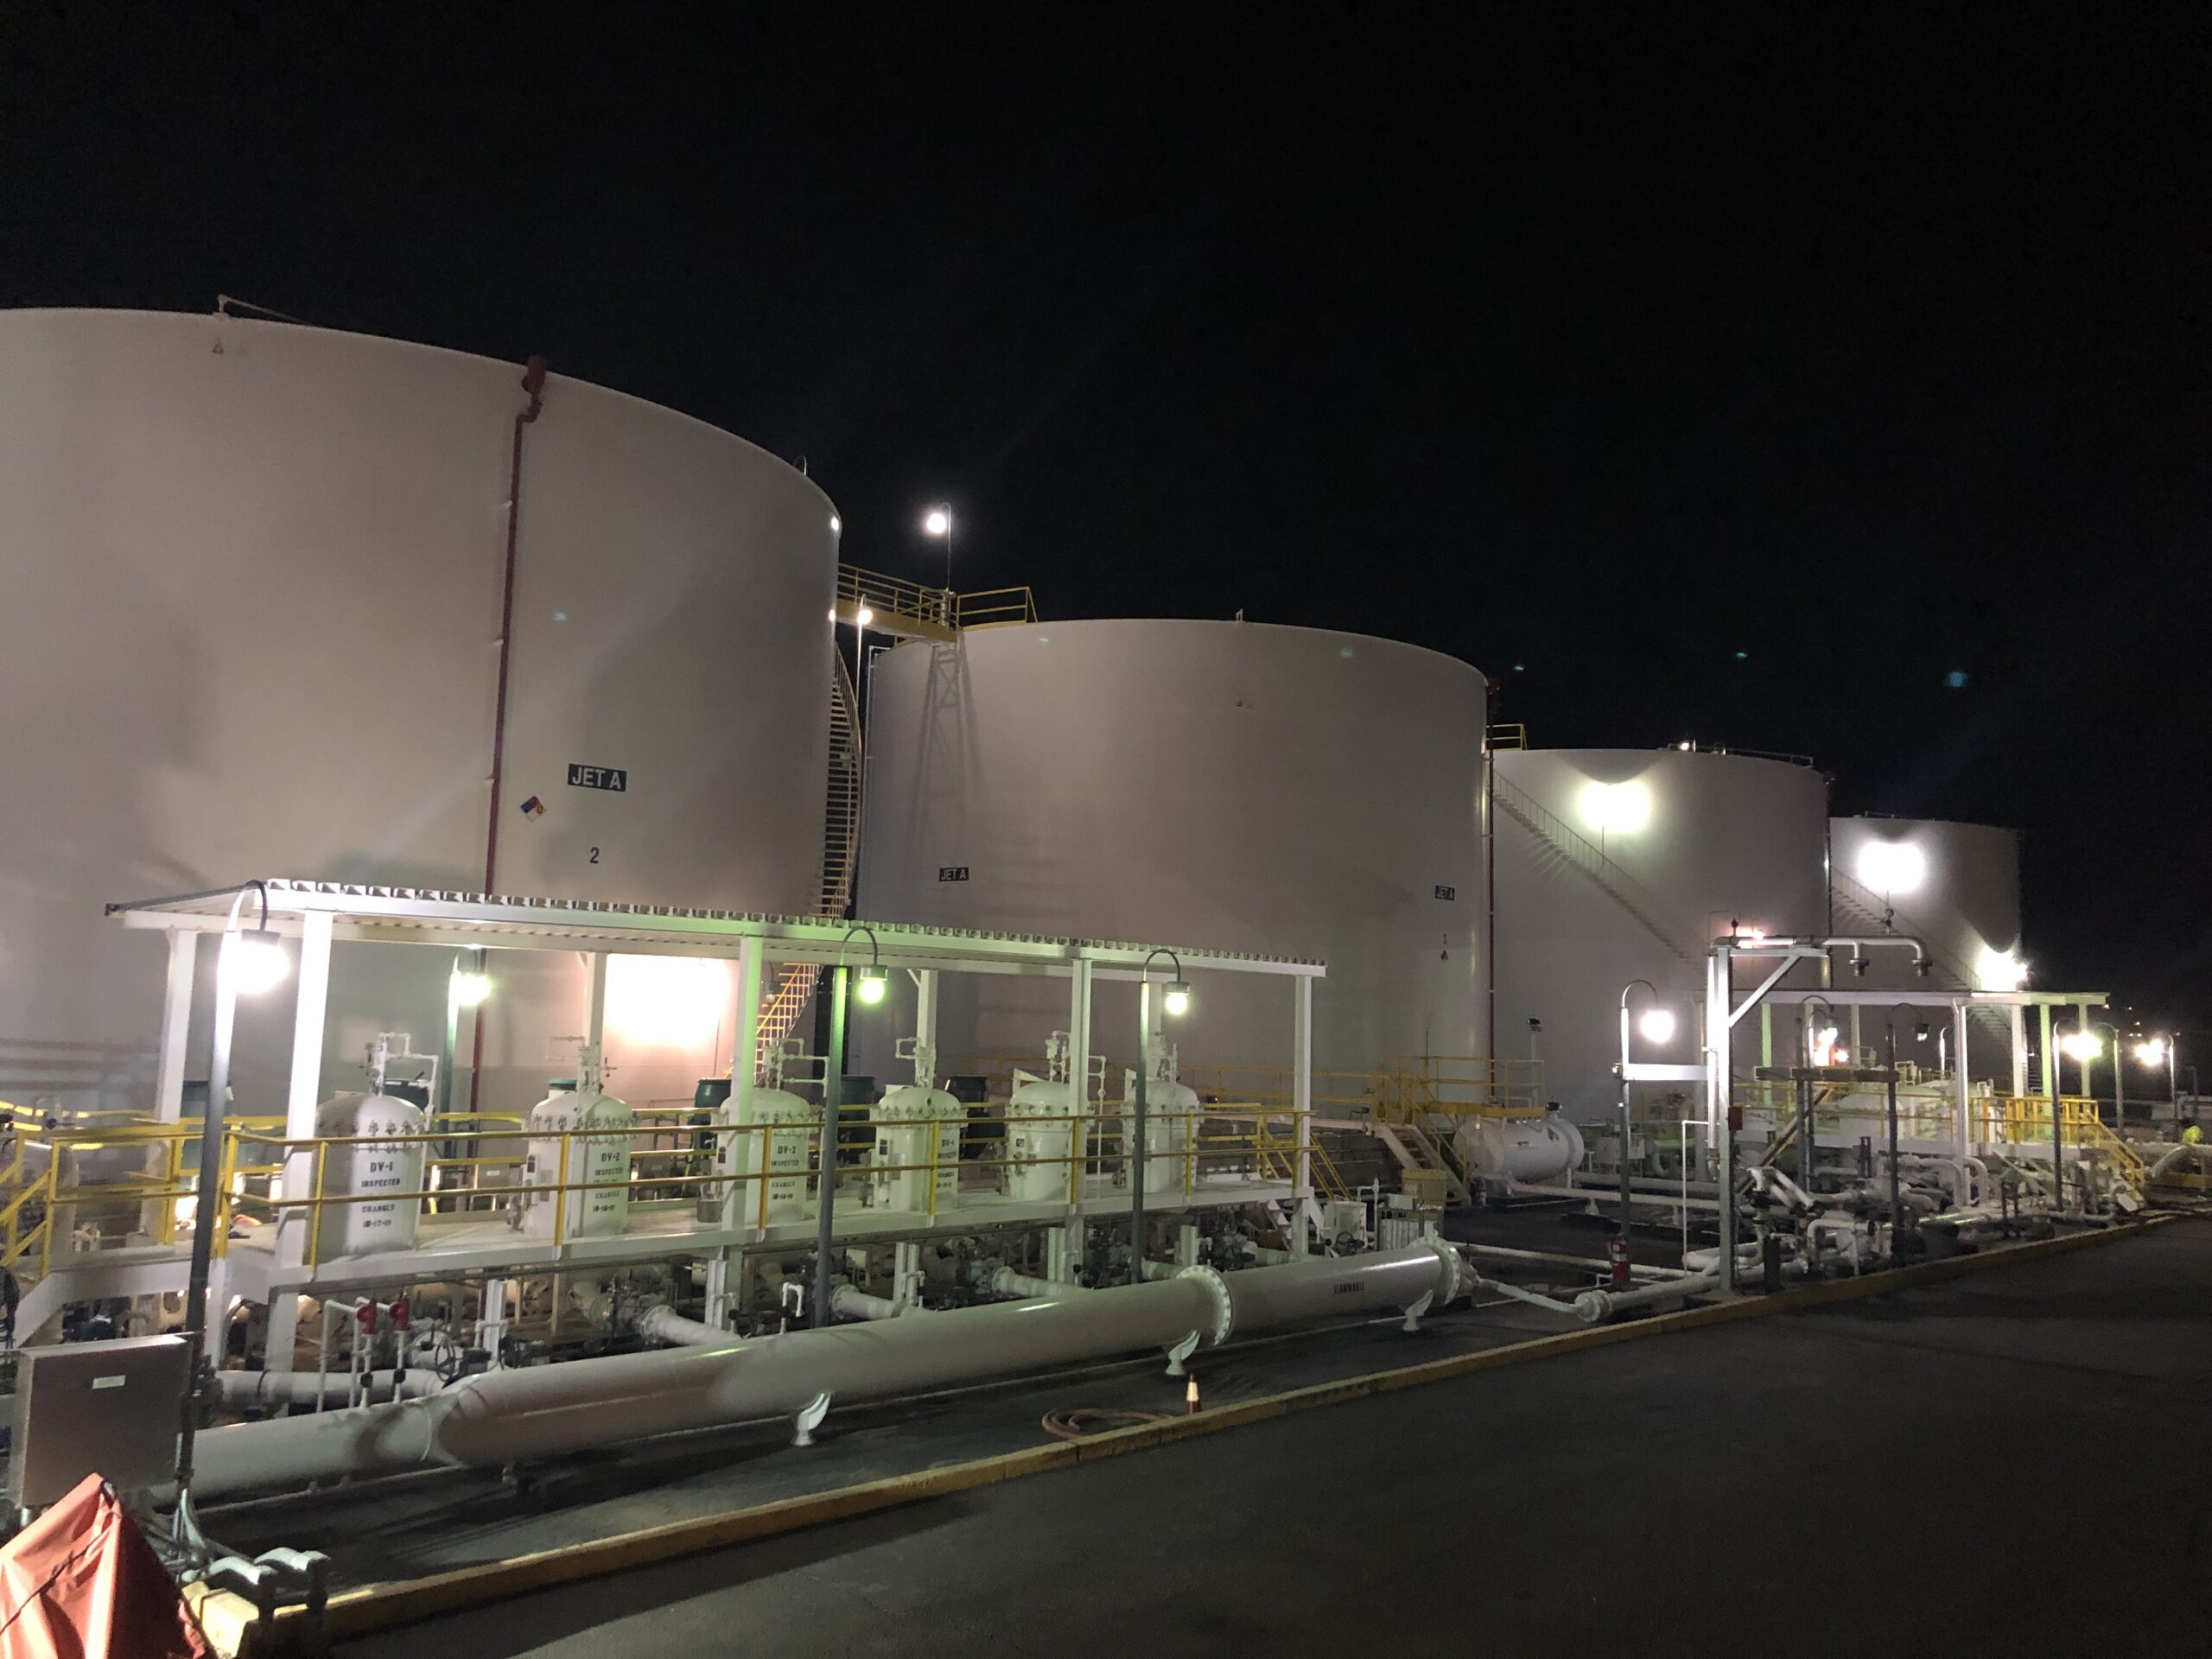 Large industrial tanks and piping illuminated at night at a chemical or fuel processing facility undergoing tank farm upgrades.